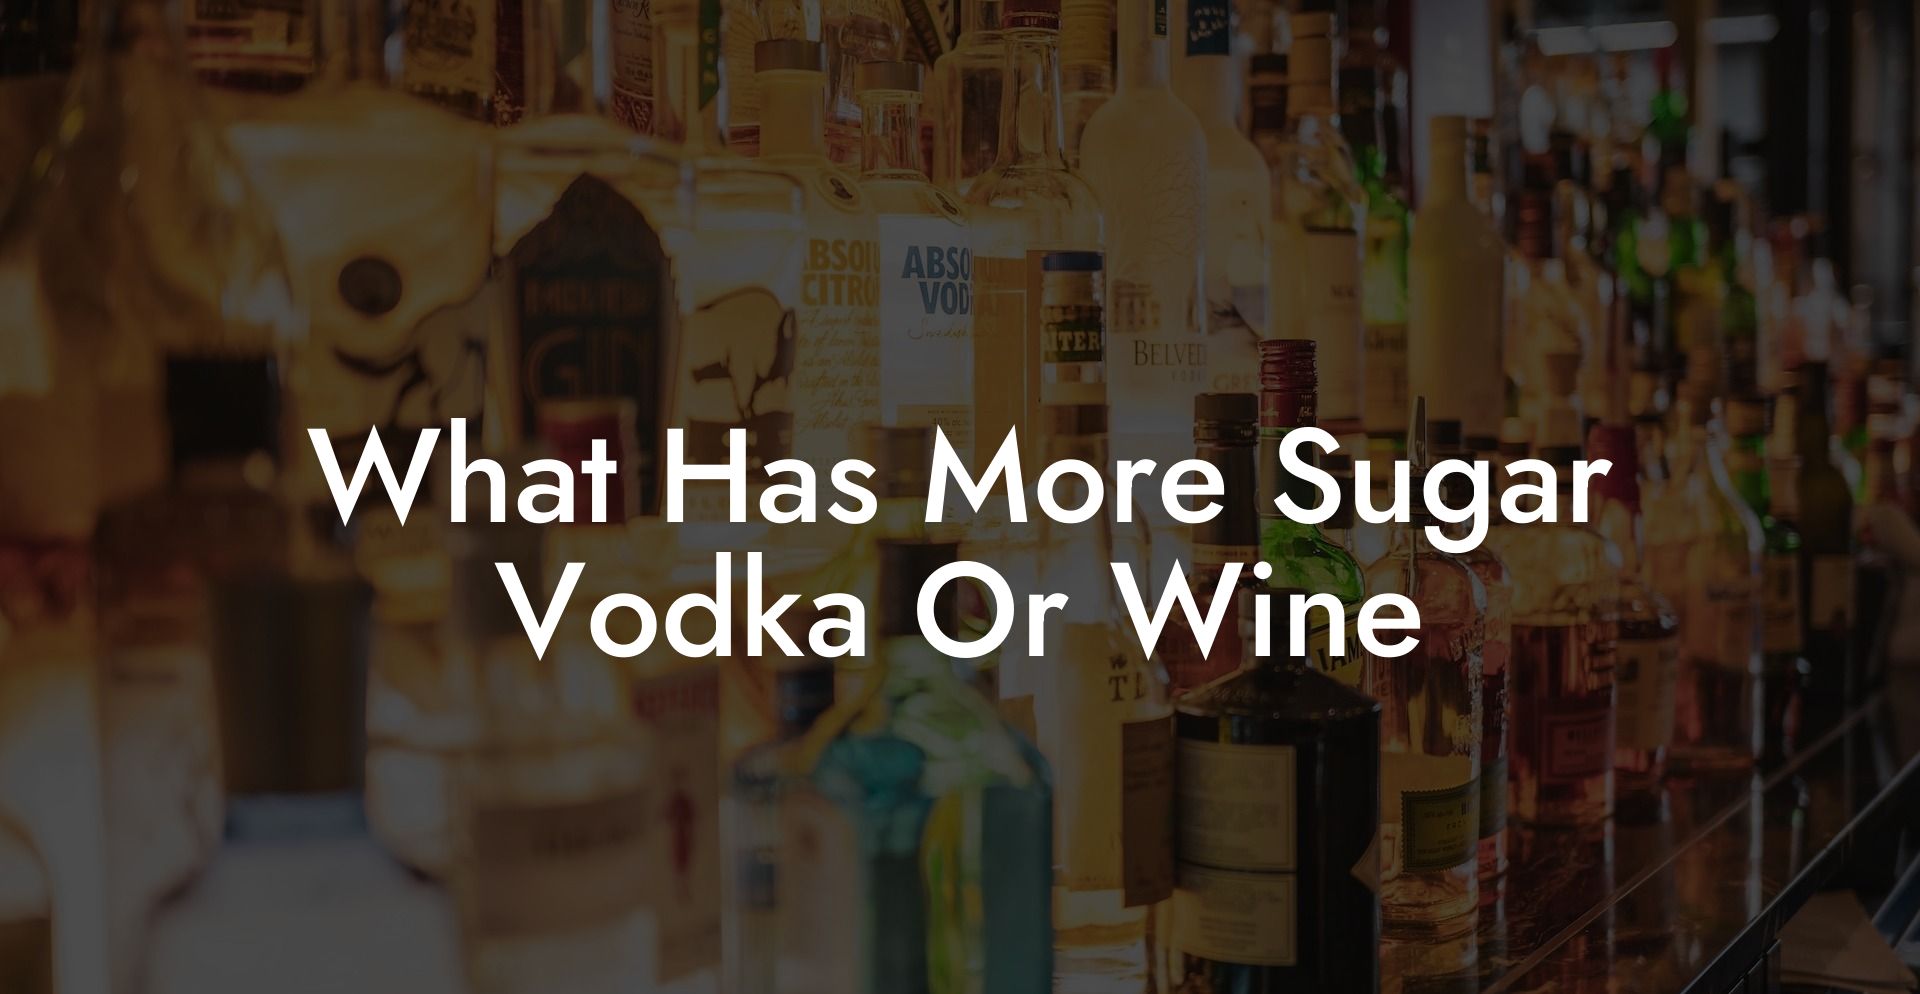 What Has More Sugar Vodka Or Wine